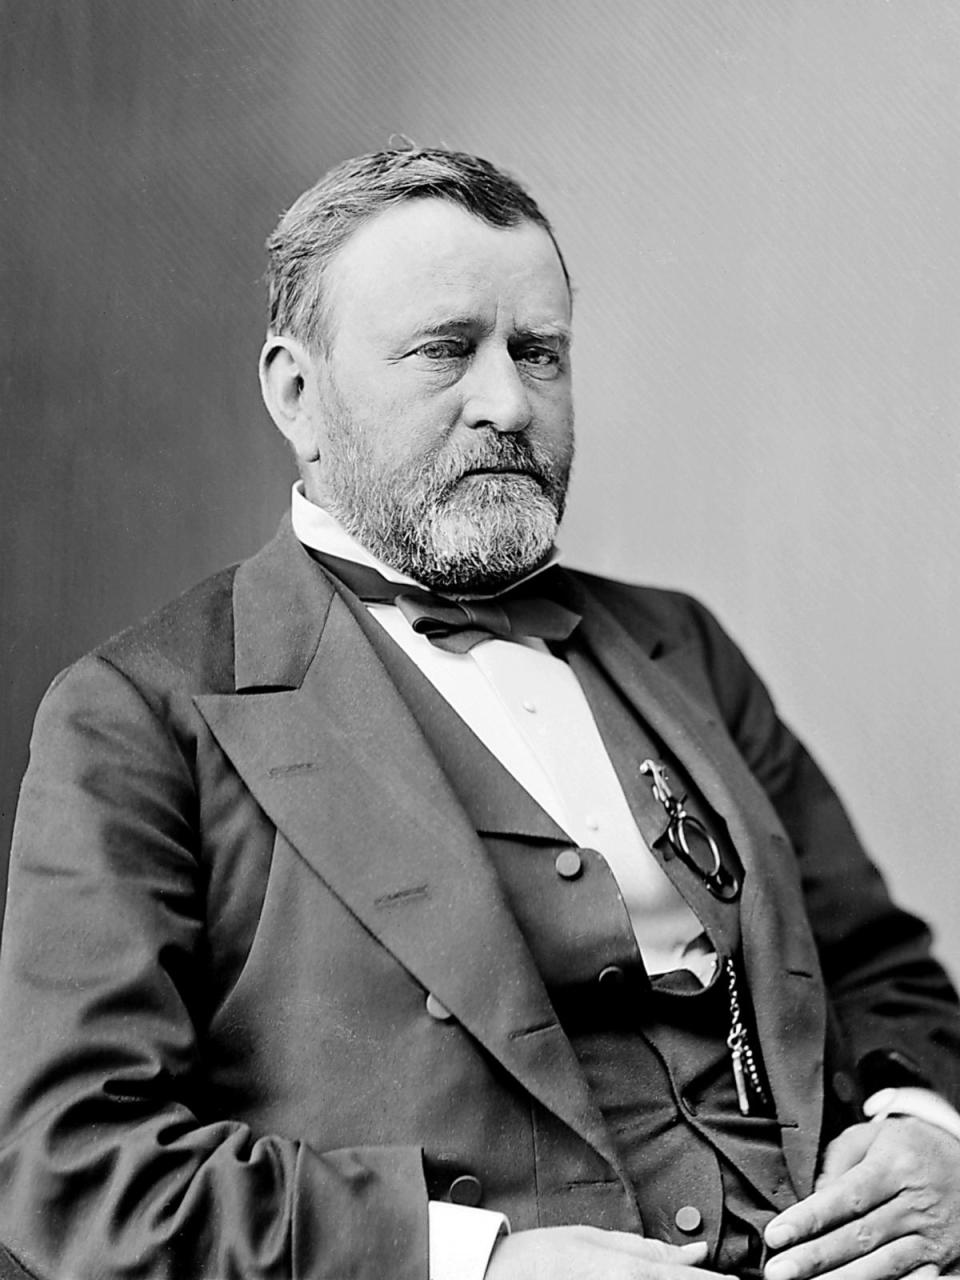 PHOTO: In this file photo taken between 1870 and 1880, Ulysses S. Grant is seen posing for a portrait.  (Pictures from History/Universal Images Group via Getty Images, FILE)